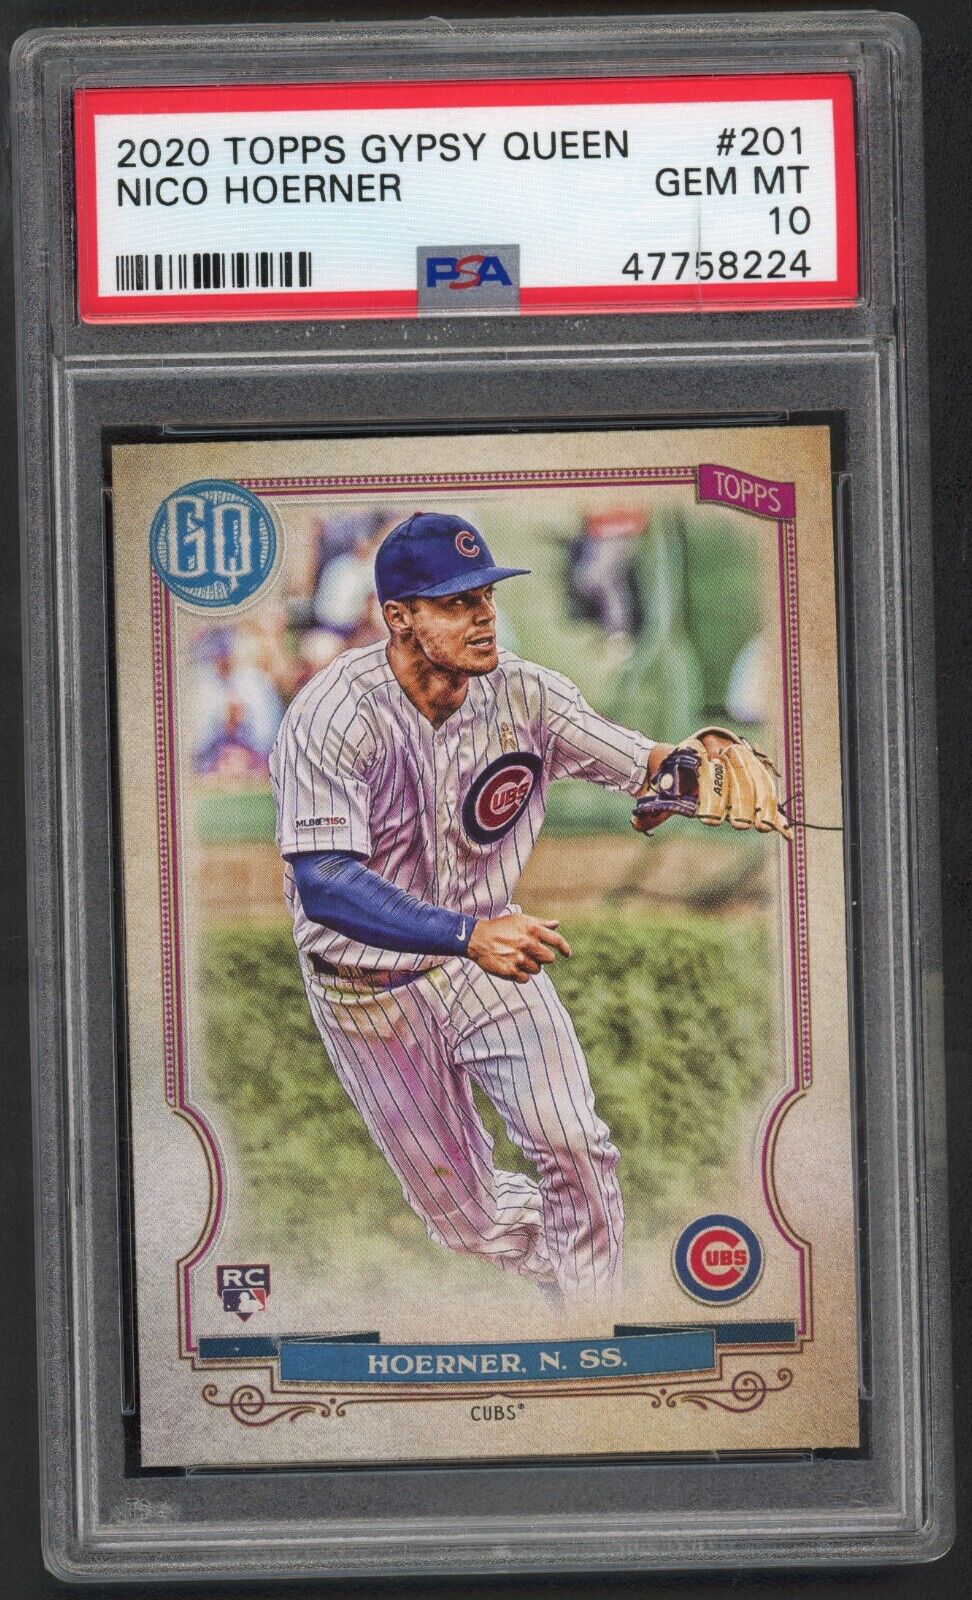 2020 Topps Gypsy Queen Nico Hoerner Chicago Cubs 201 PSA 10 GEM MINT Rookie Card